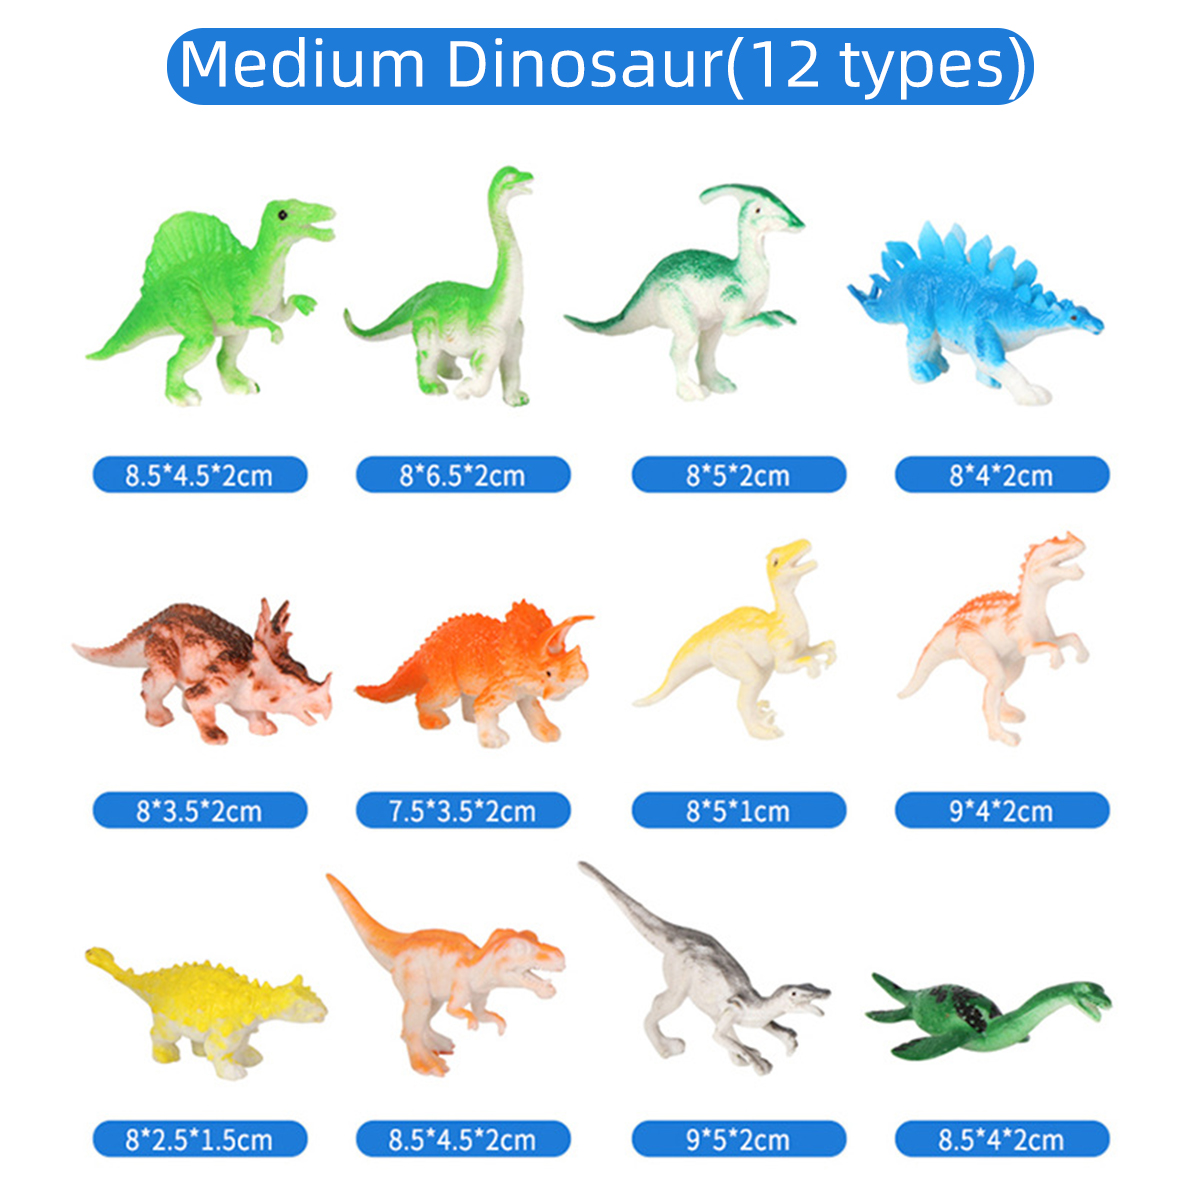 2833346365Pcs-Multi-style-Diecast-Dinosaurs-Model-Play-Set-Educational-Toy-with-Play-Mat-for-Kids-Ch-1836203-14